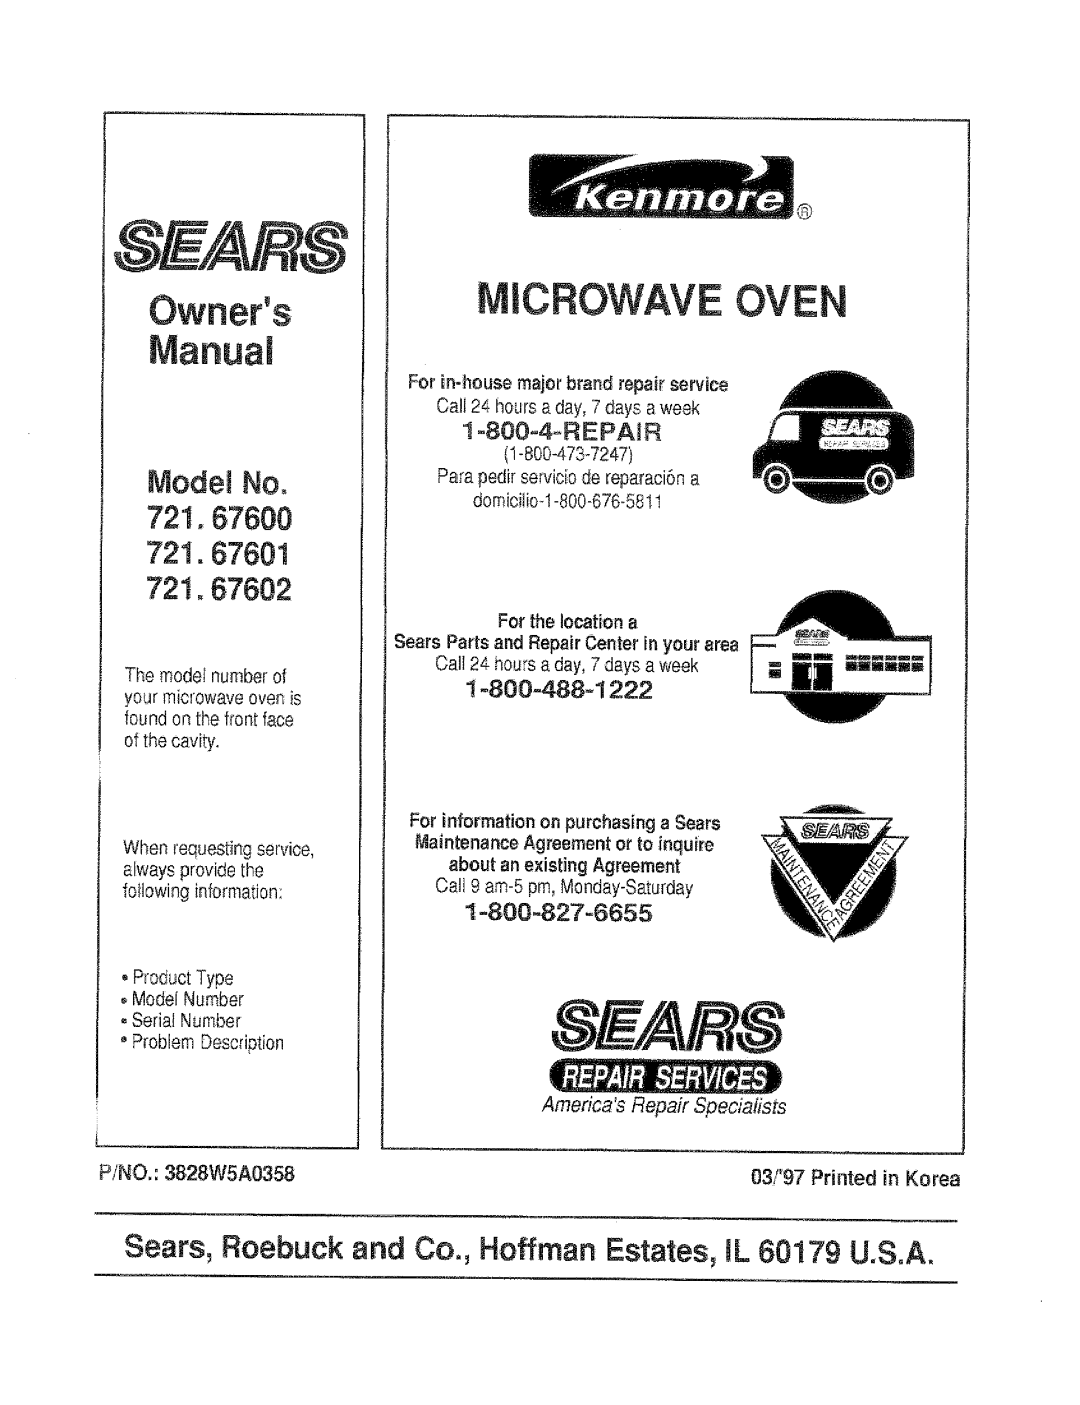 Sears Oven, Mode1 No 7211,67600 721.67601 72t.67602, 1-800o4_REPAJR, 1-800-827--6655, The modet numberof, of the cavity 